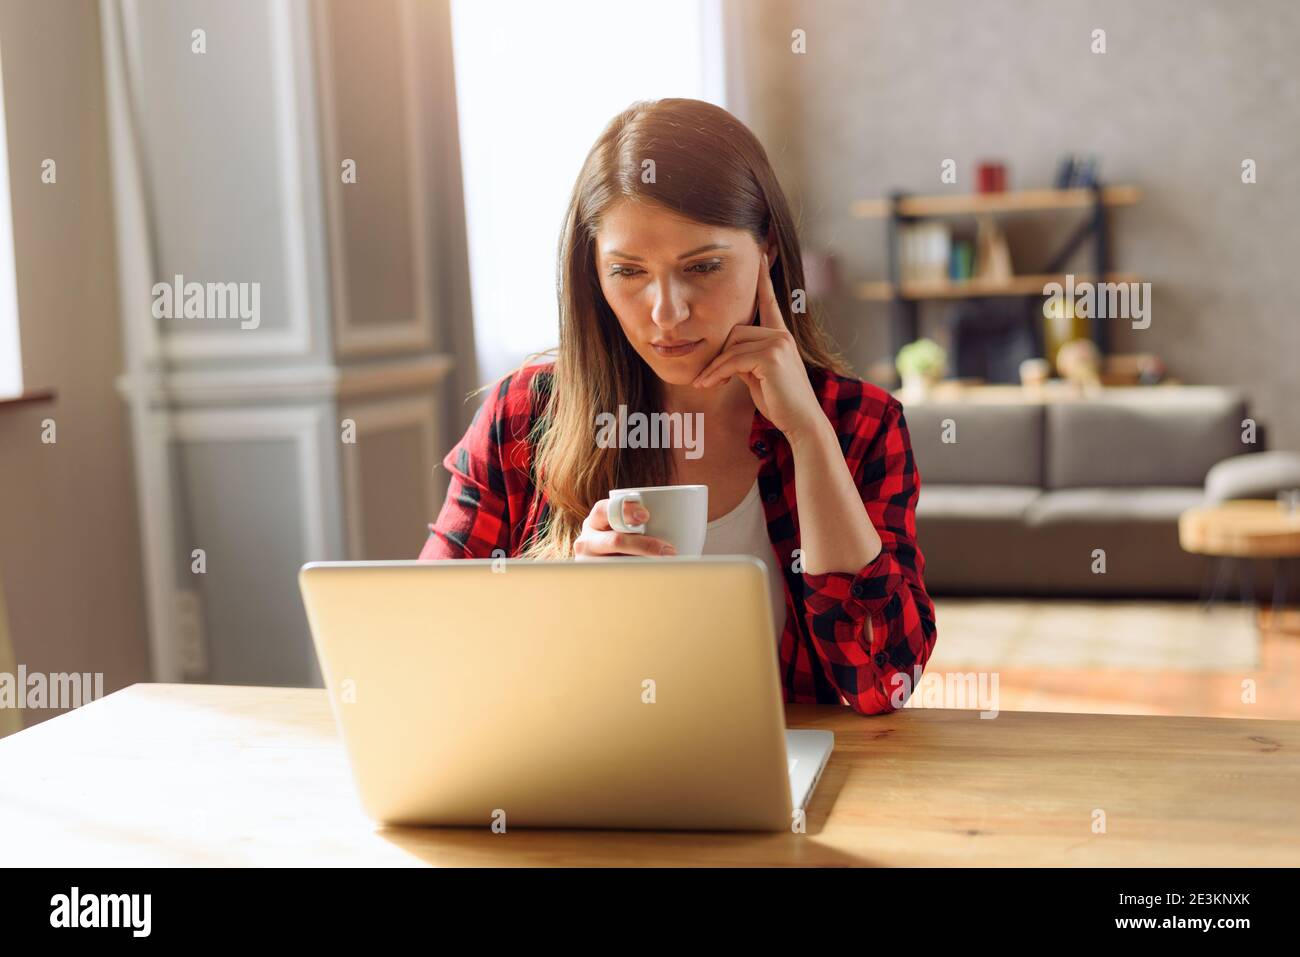 Woman teleworker works at home with a laptop Stock Photo